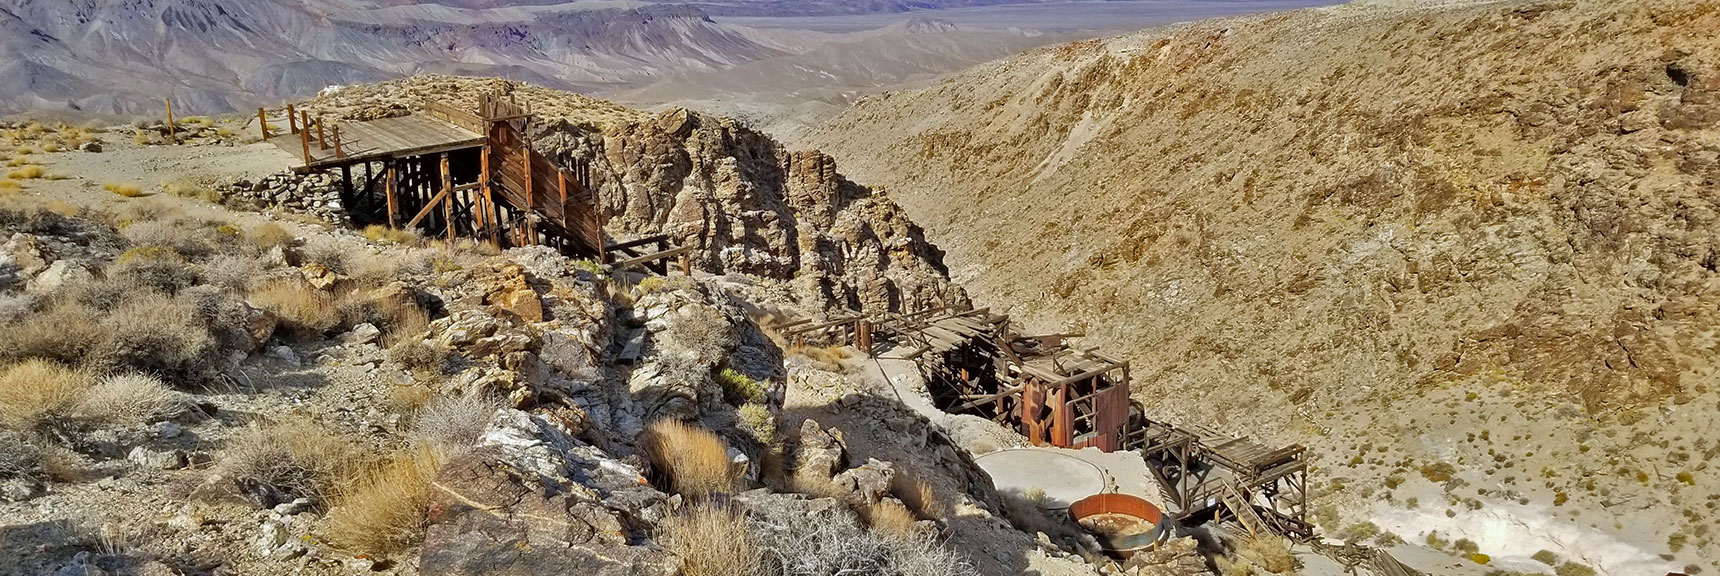 Skidoo Stamp Mill and Mines | Death Valley National Park, California